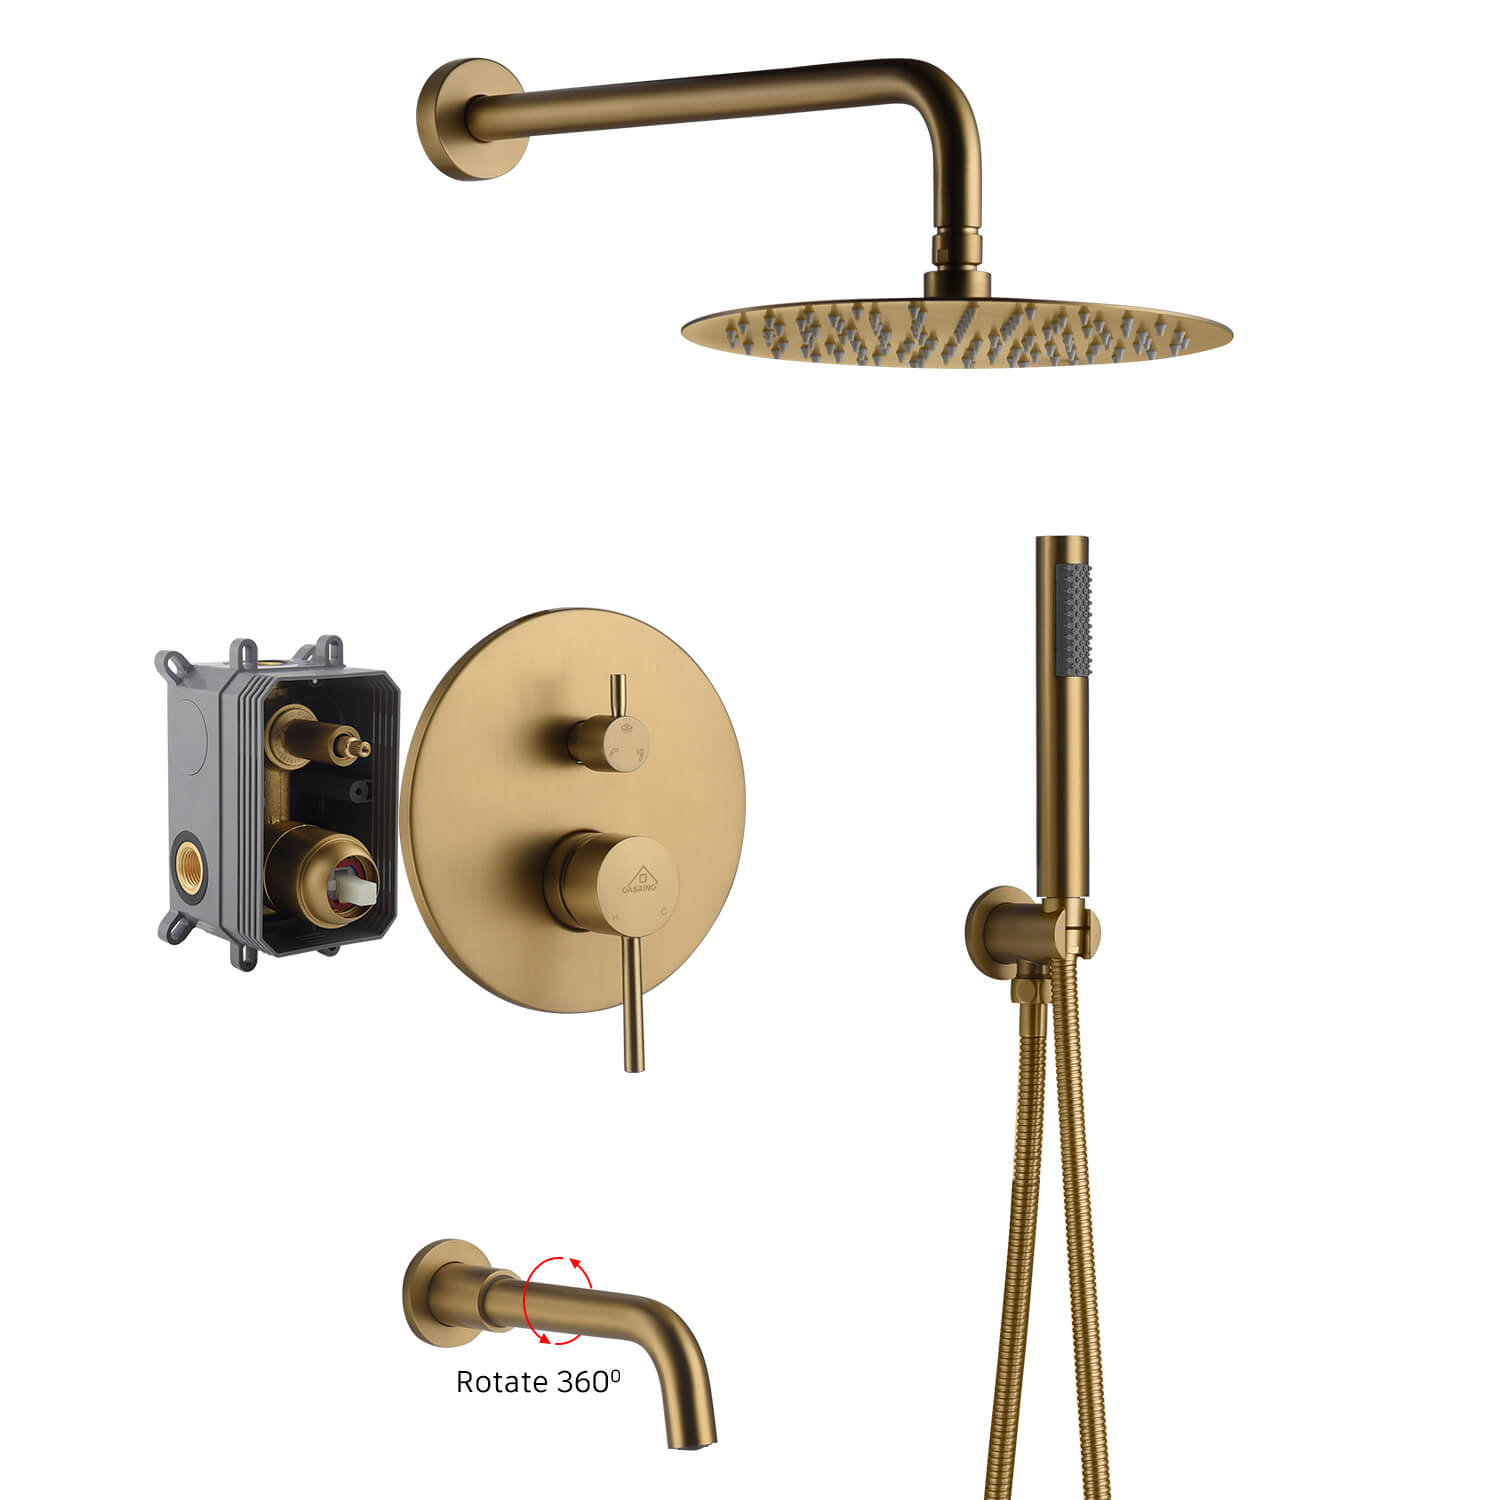 10" Round Wall Mount Dual Shower Heads Shower System with Tub Spout and Handheld Shower Head in Brushed Gold - CASAINC quality promise solid brass pressure, cupc certification